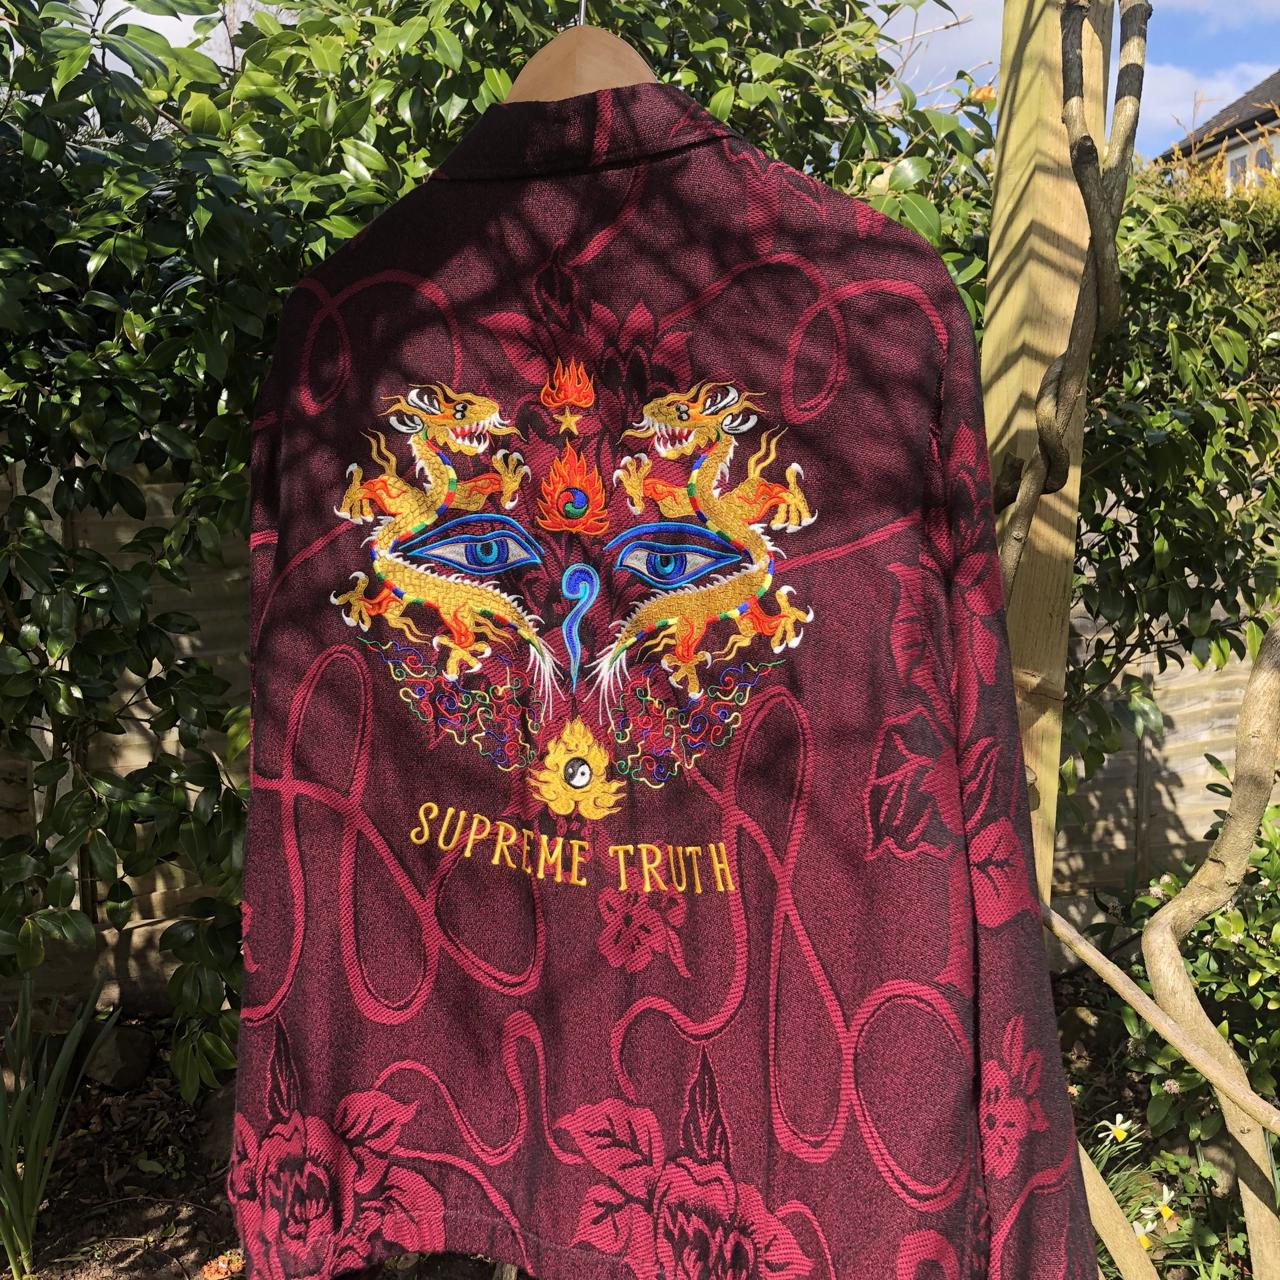 Supreme Truth Tour Jacket XL, Great quality (9/10),...